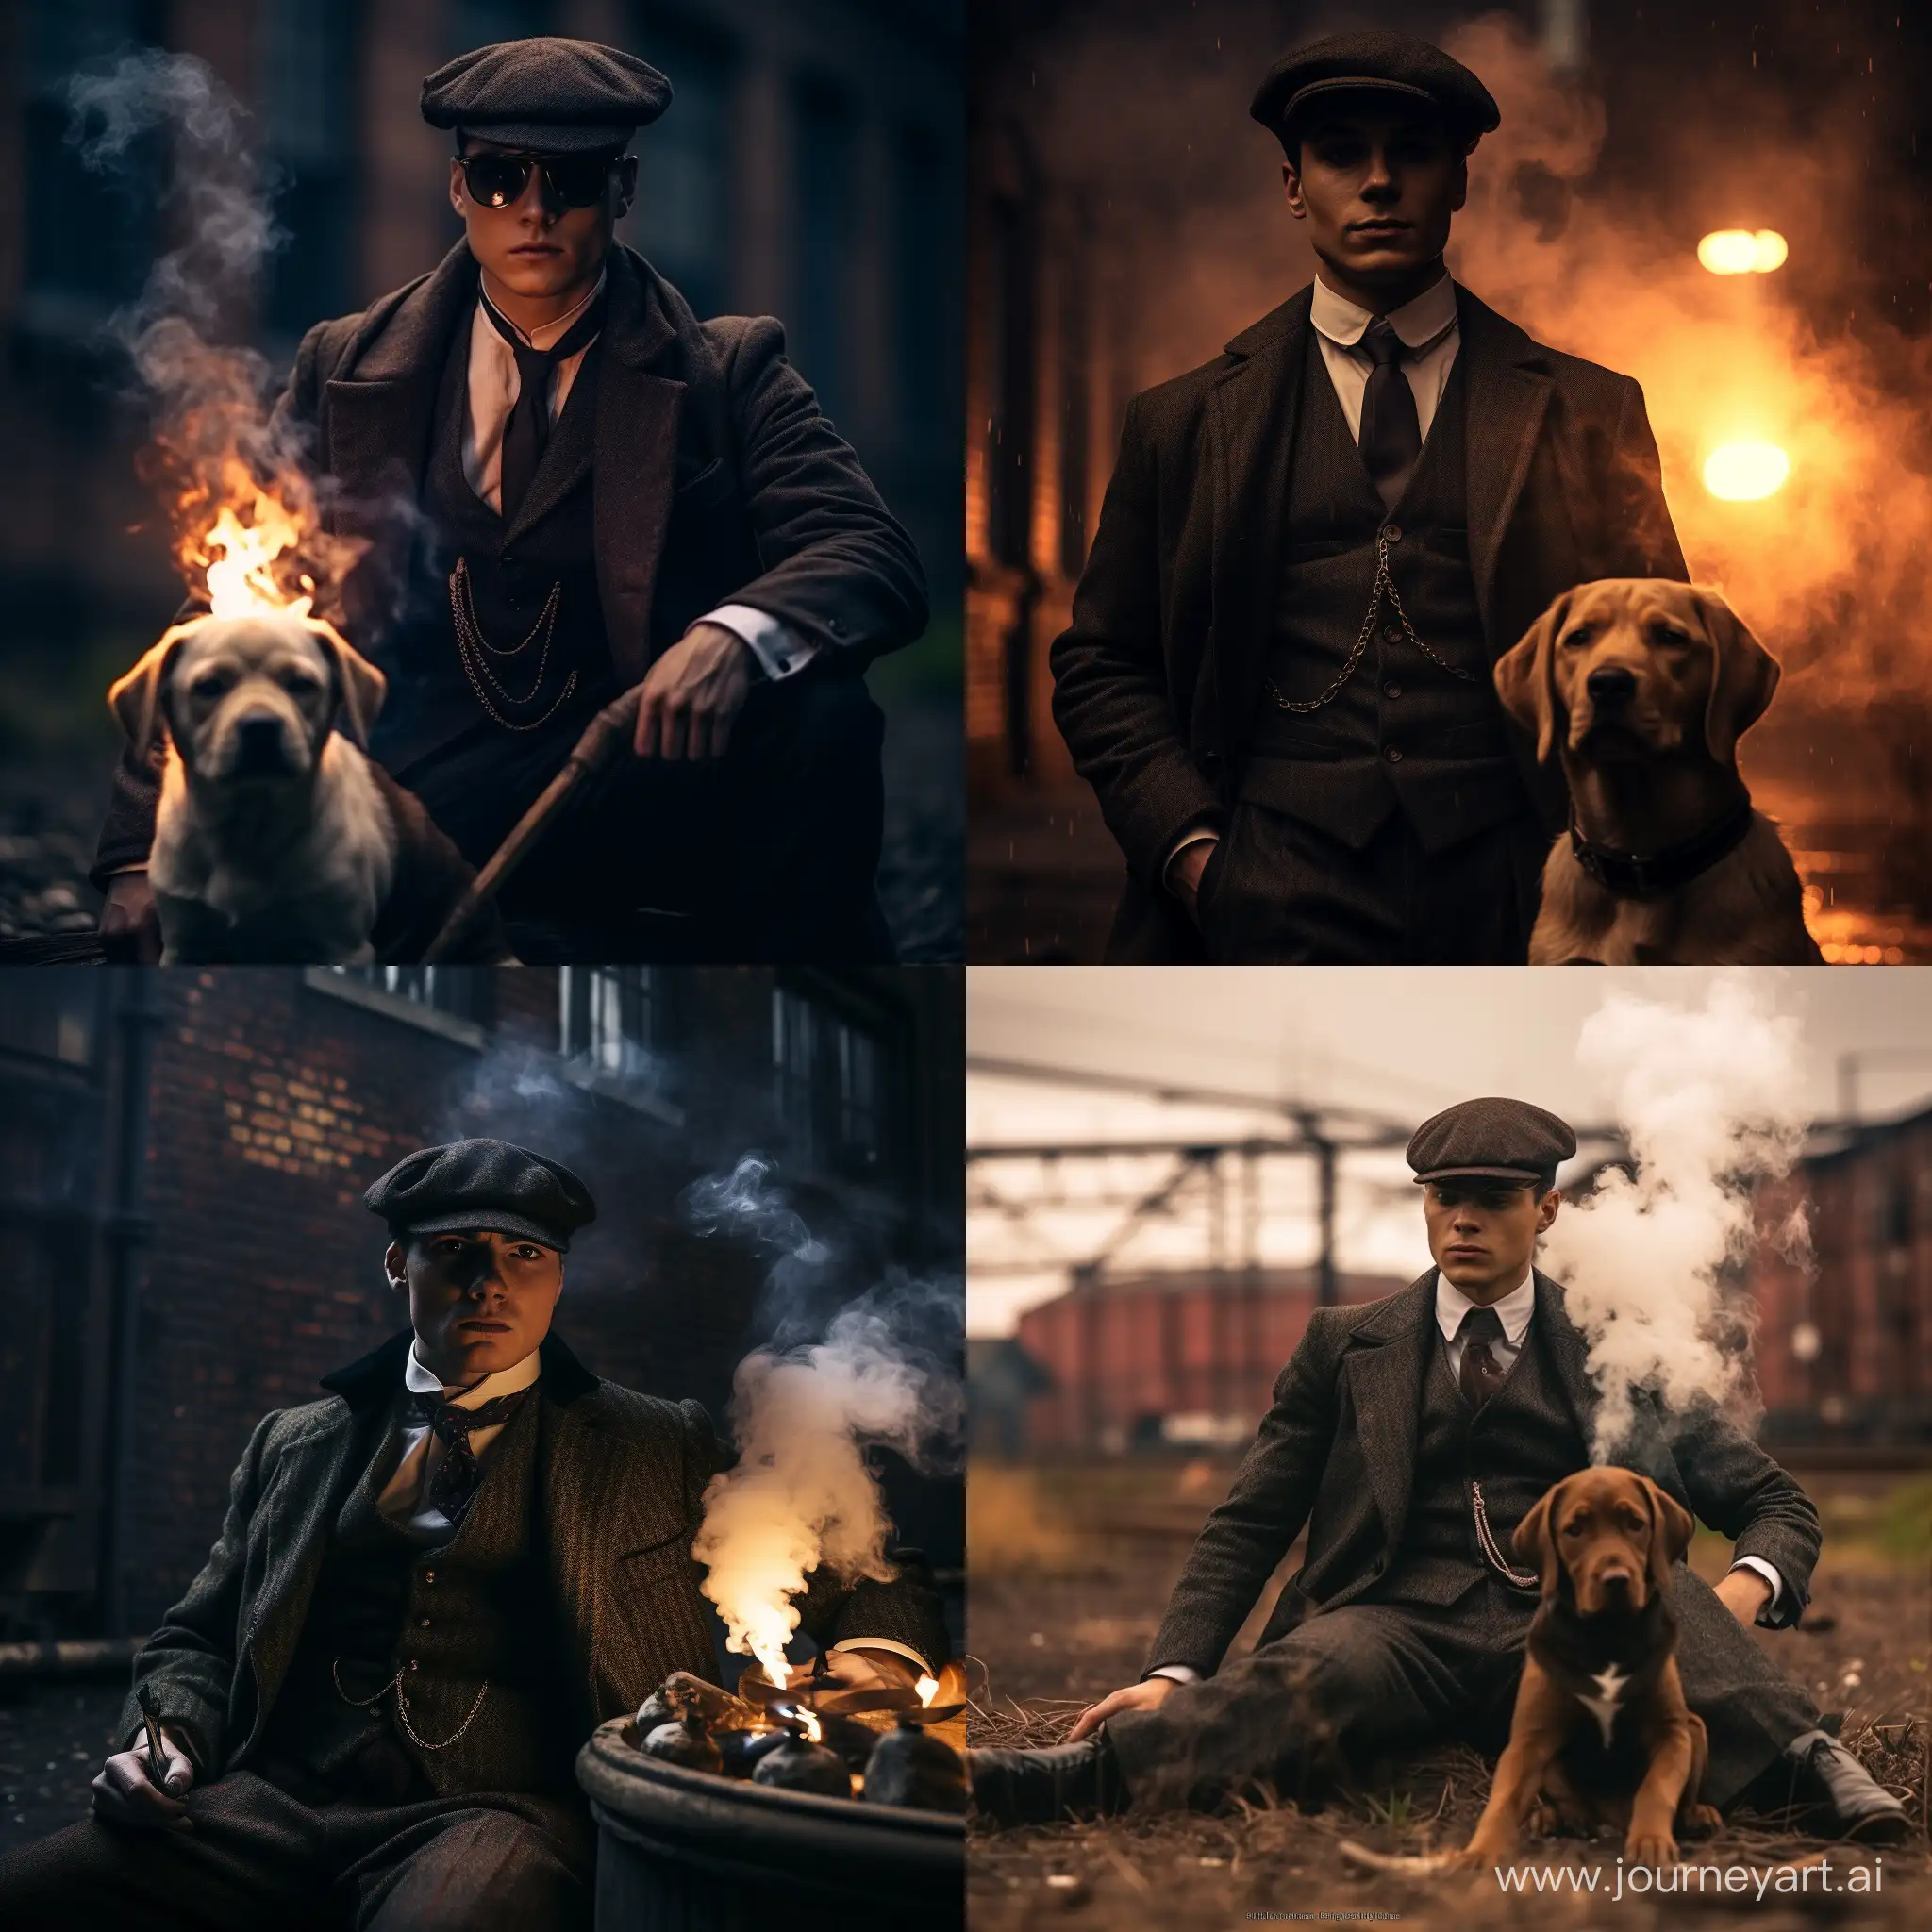 Pug-Cosplaying-as-Thomas-Shelby-Amid-Explosive-Ambiance